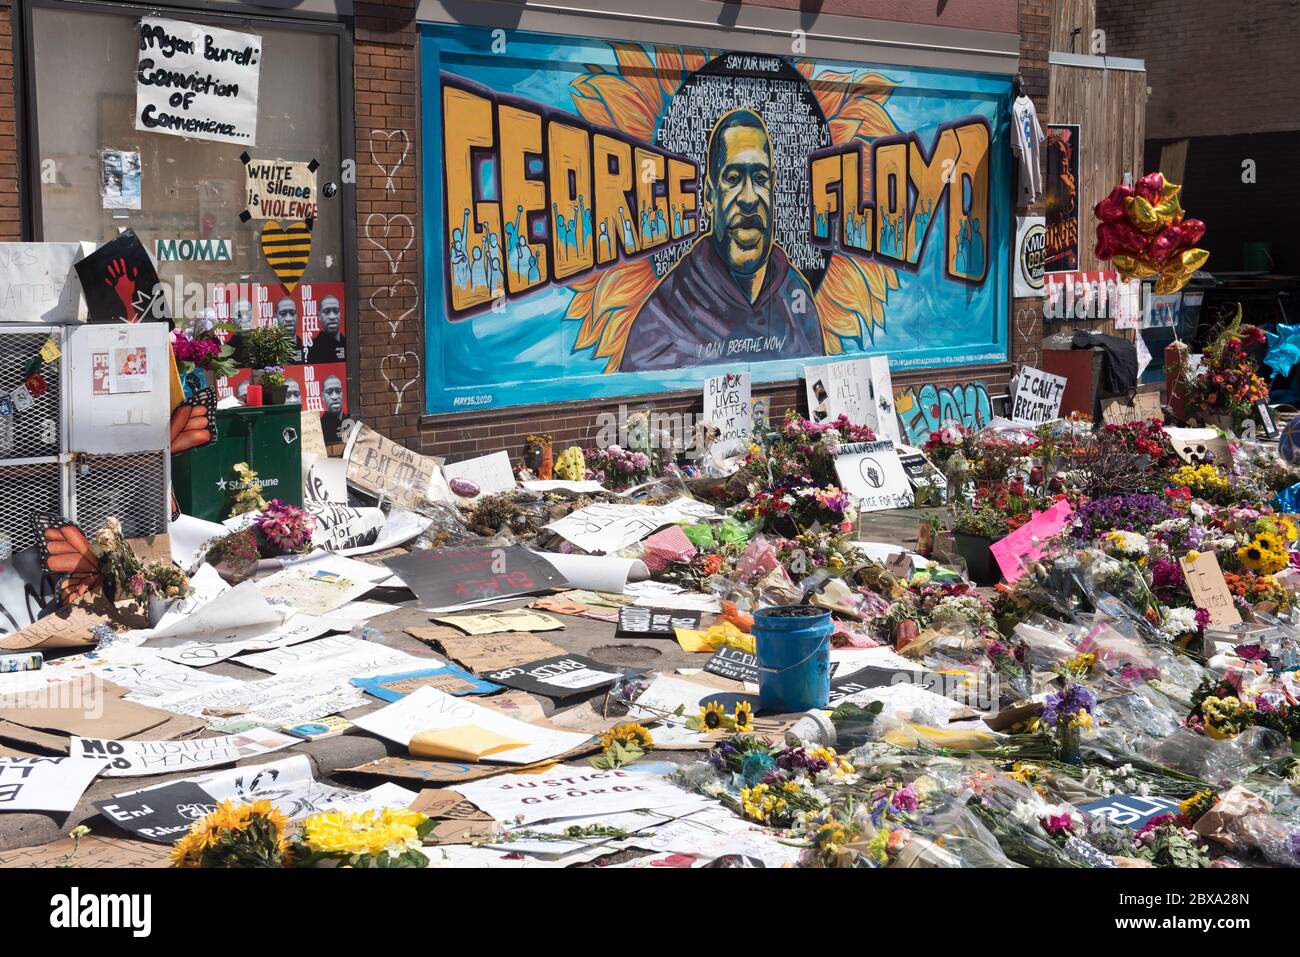 George Floyd Memorial, 38th and Chicago, Minneapolis. A sea of flowers and tributes. Stock Photo